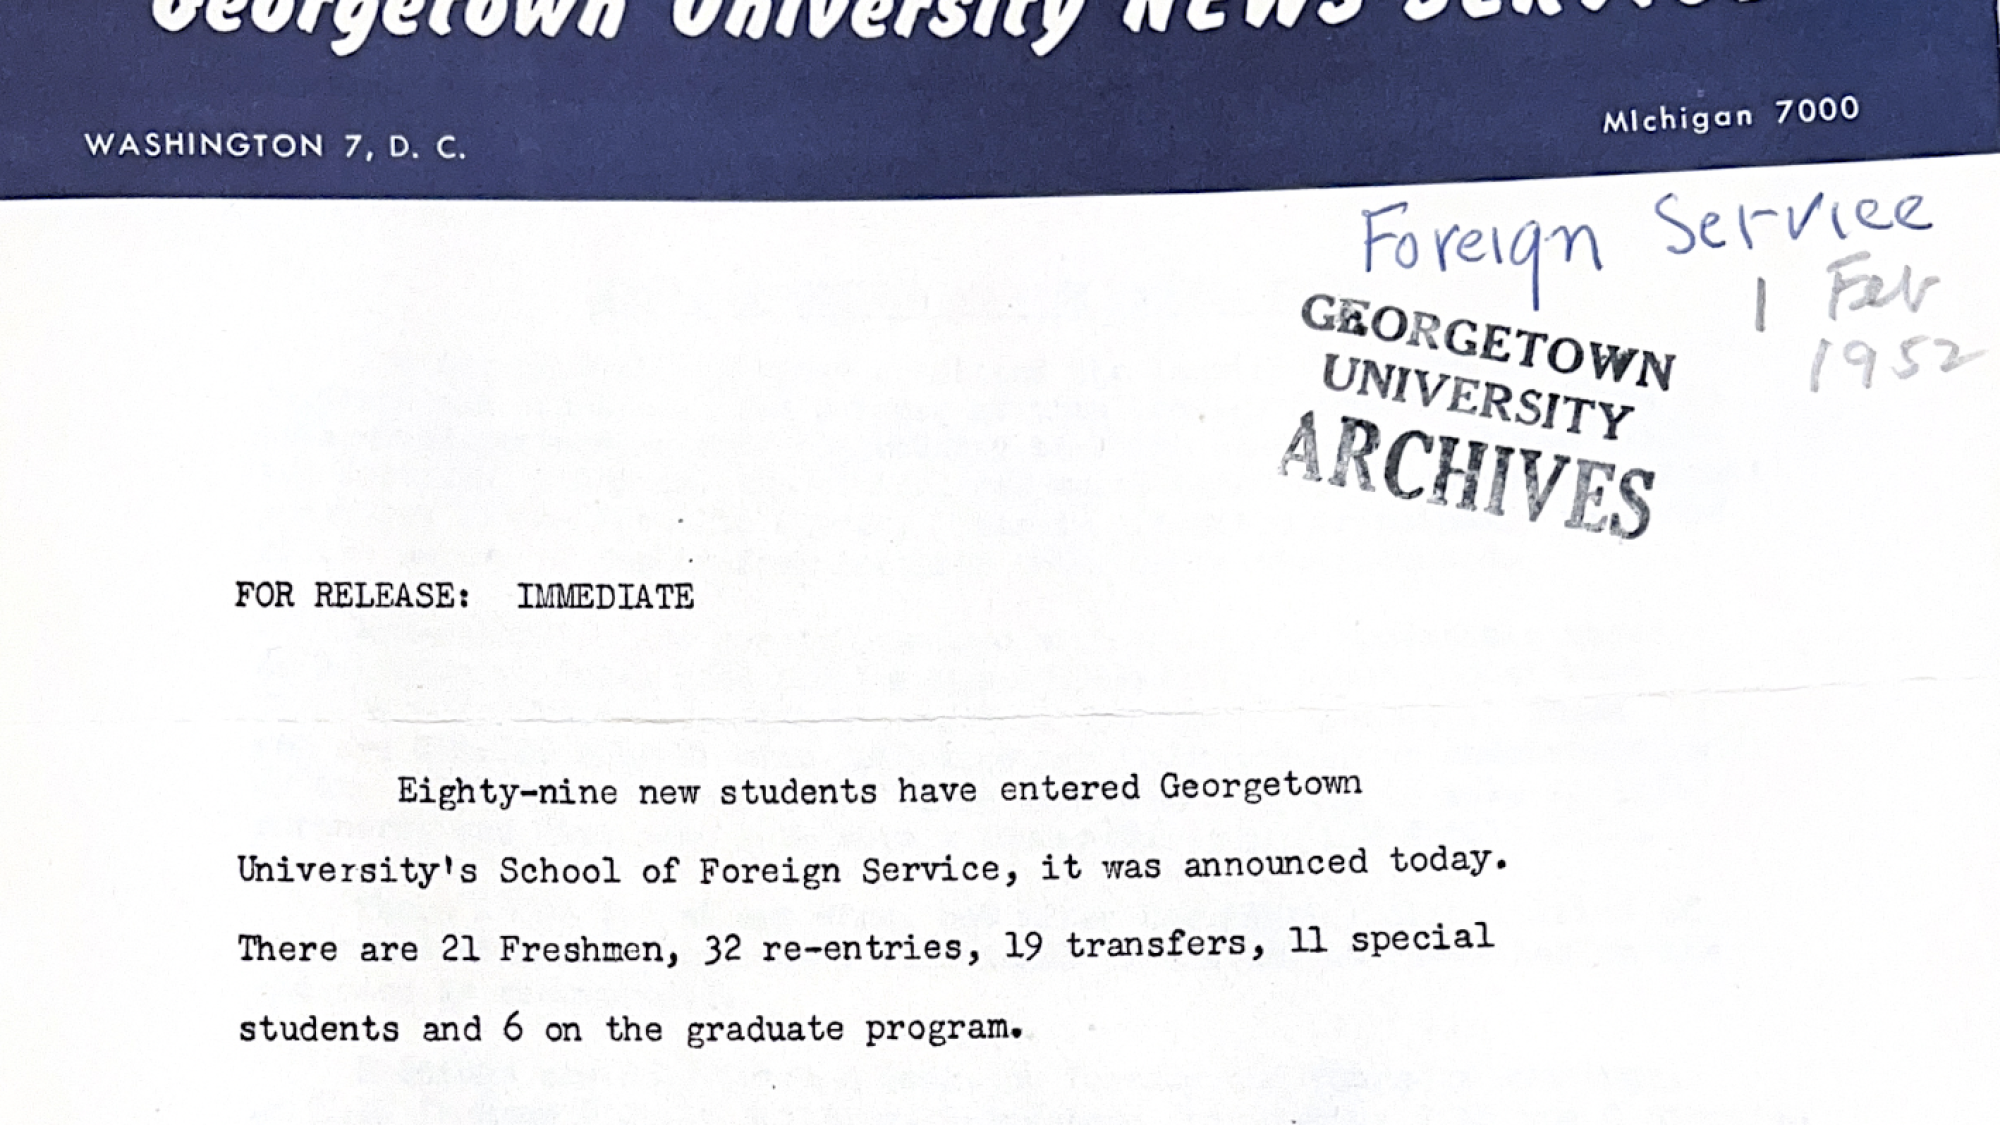 1952 news release with numbers of incoming students